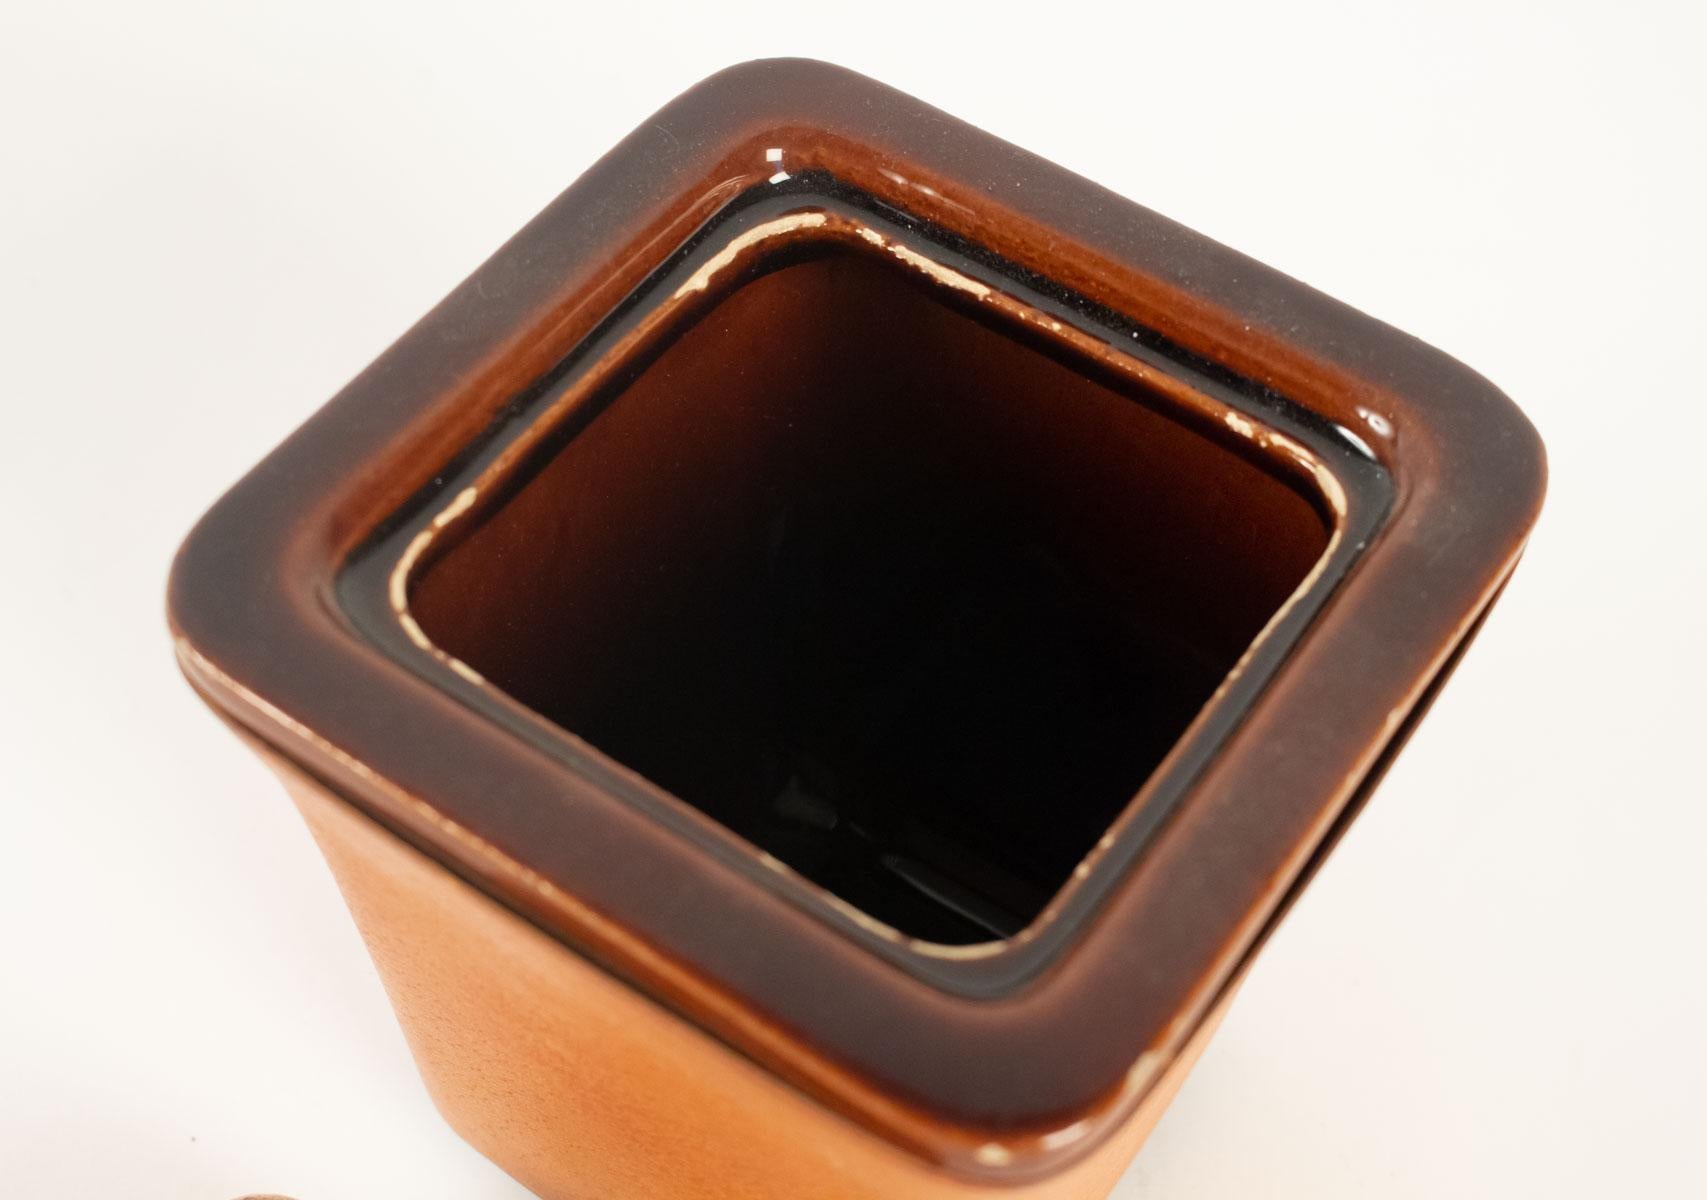 French Tobacco Pot, Leather Sheathed from the Maison Longchamp Brand in Paris